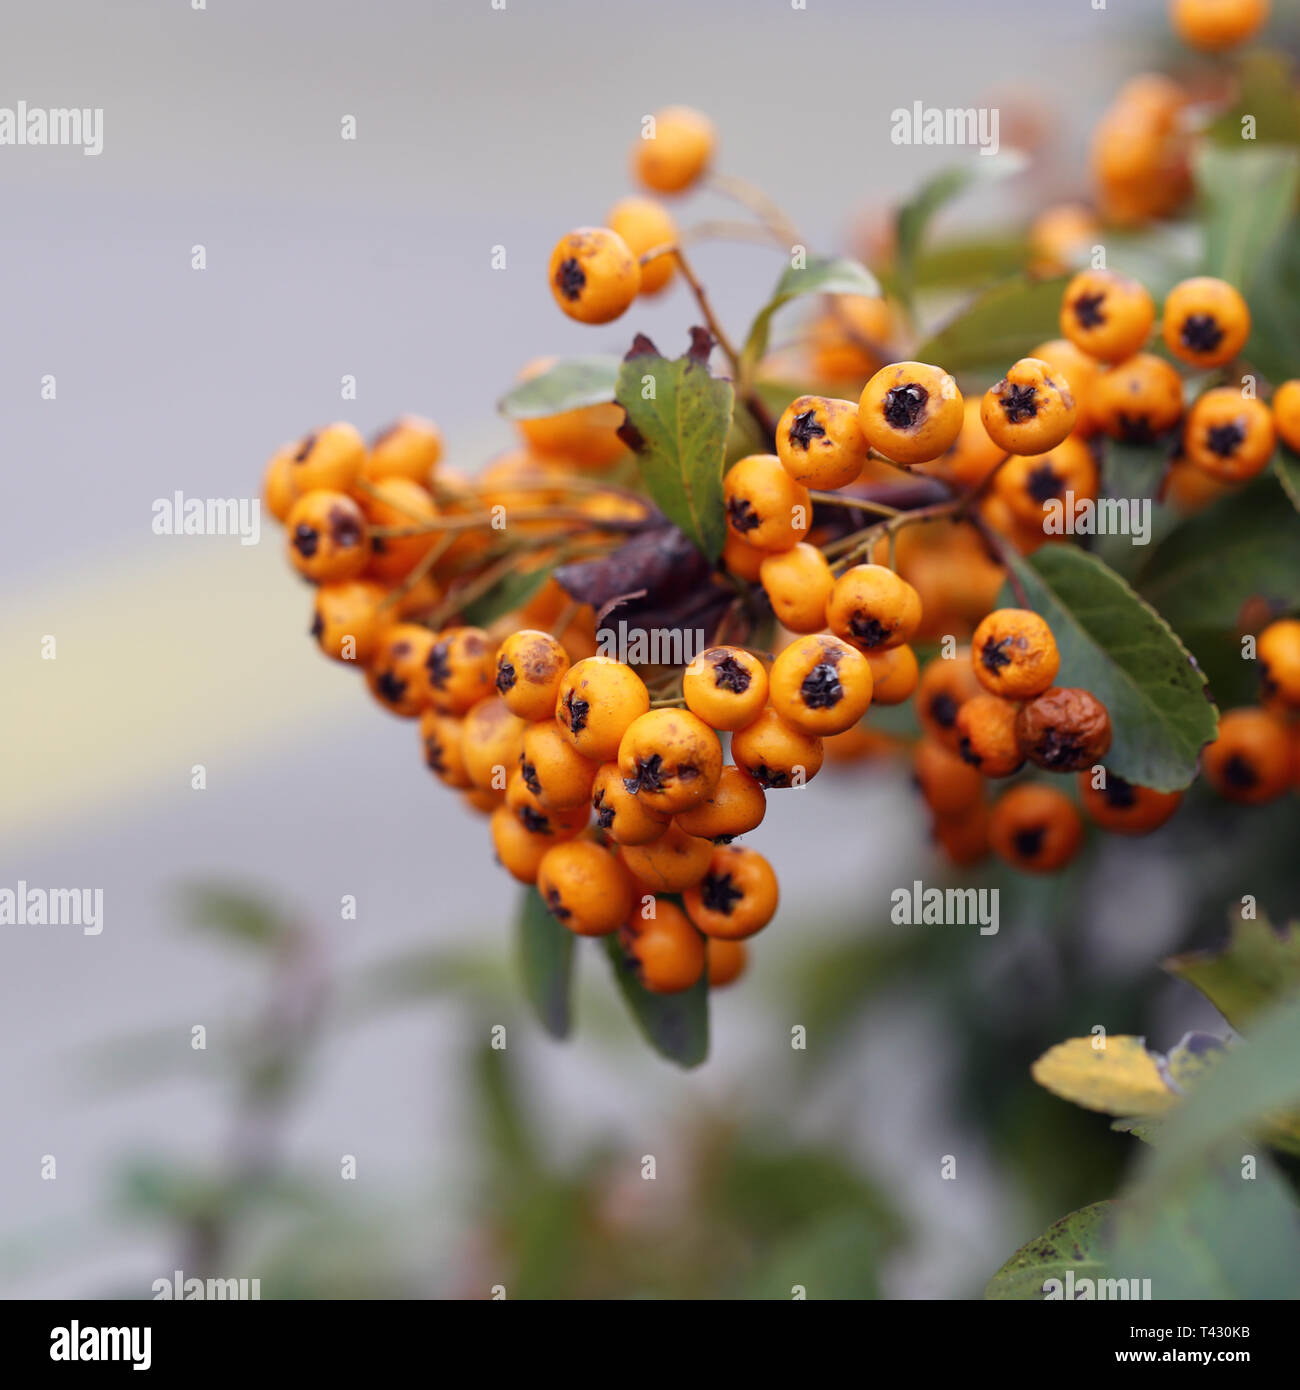 Orange berries hanging from a bush branch. The background includes beautiful green leaves and some asphalt. Closeup photo. Color image. Stock Photo